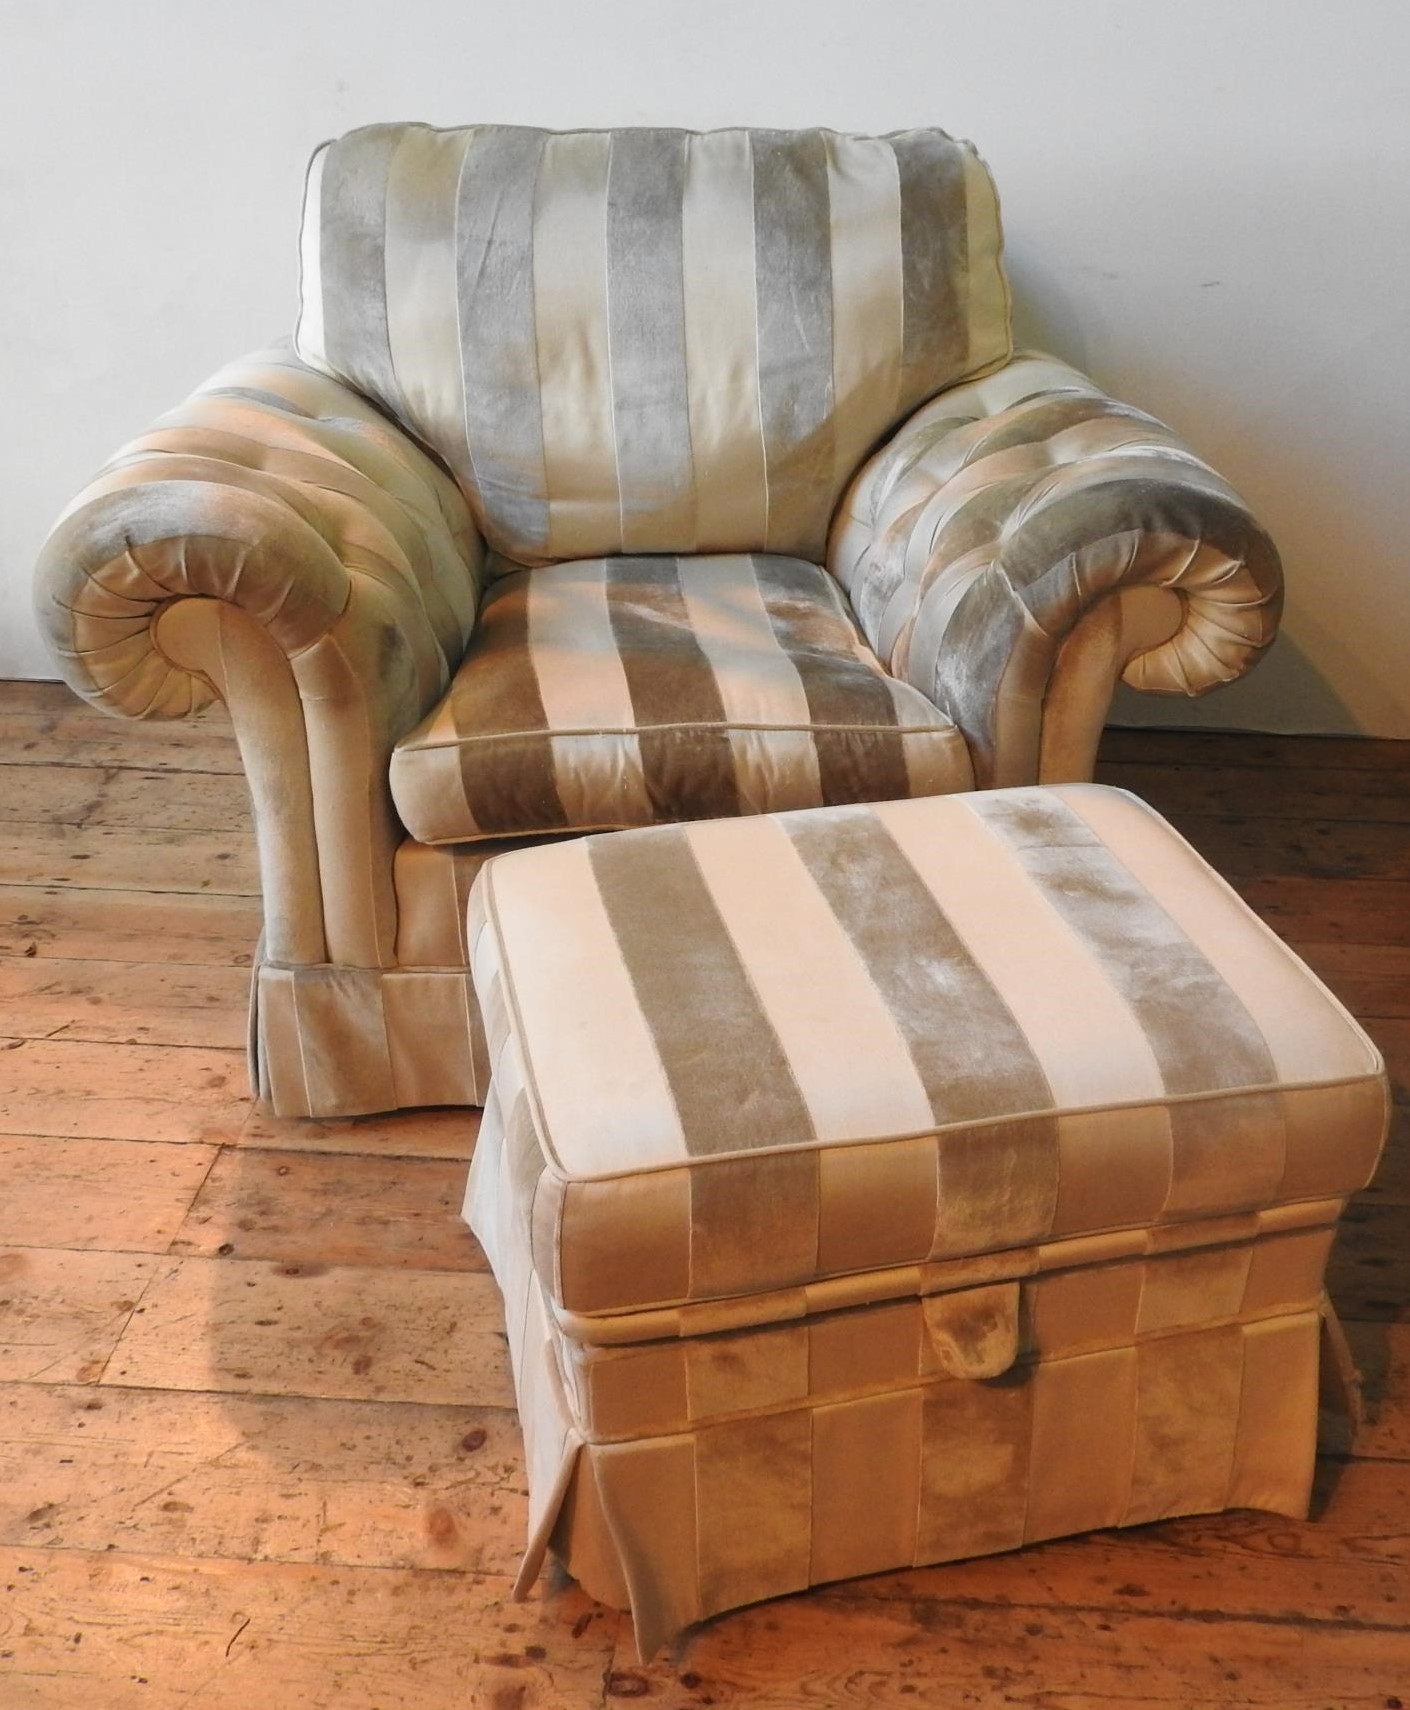 A DURESTA STRIPED BUTTON UPHOLSTERED ARMCHAIR AND MATCHING FOOT STOOL, the chair measures 100 x